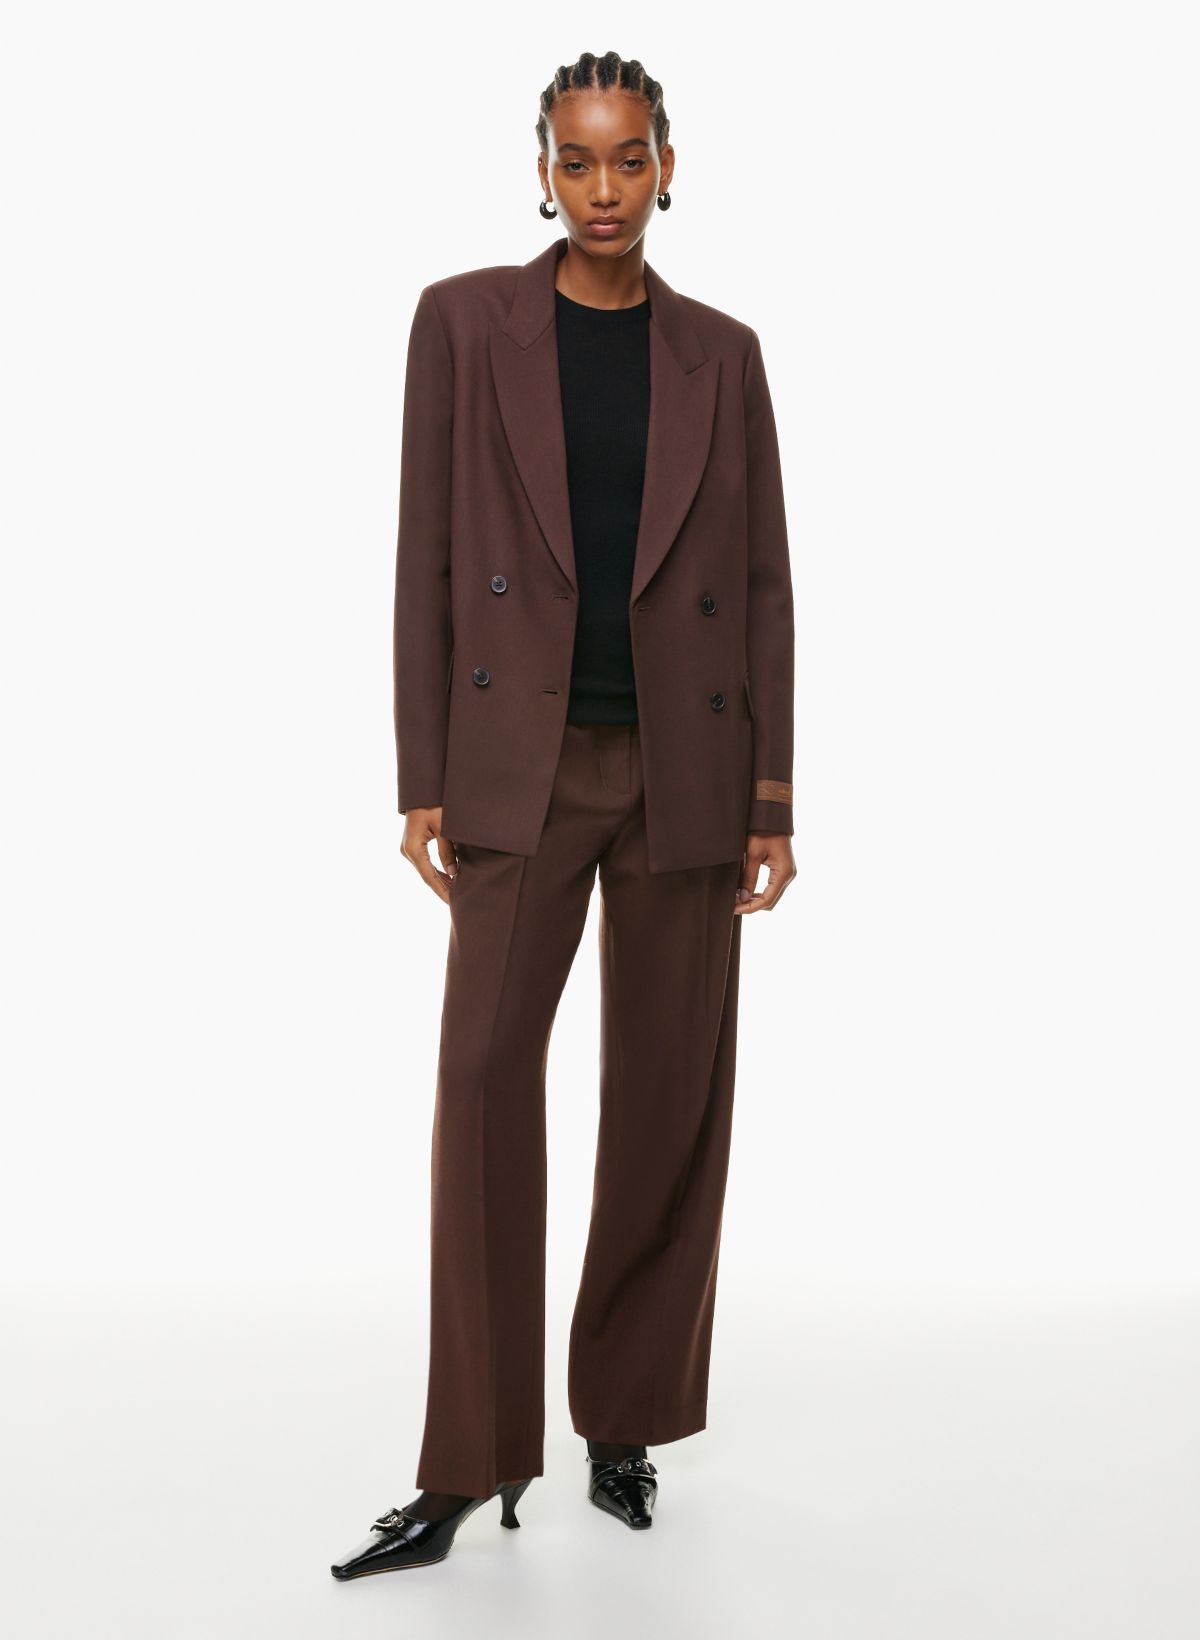 Dusty Pink Flared Pants Suit With Blazer, Padded Shoulders Blazer